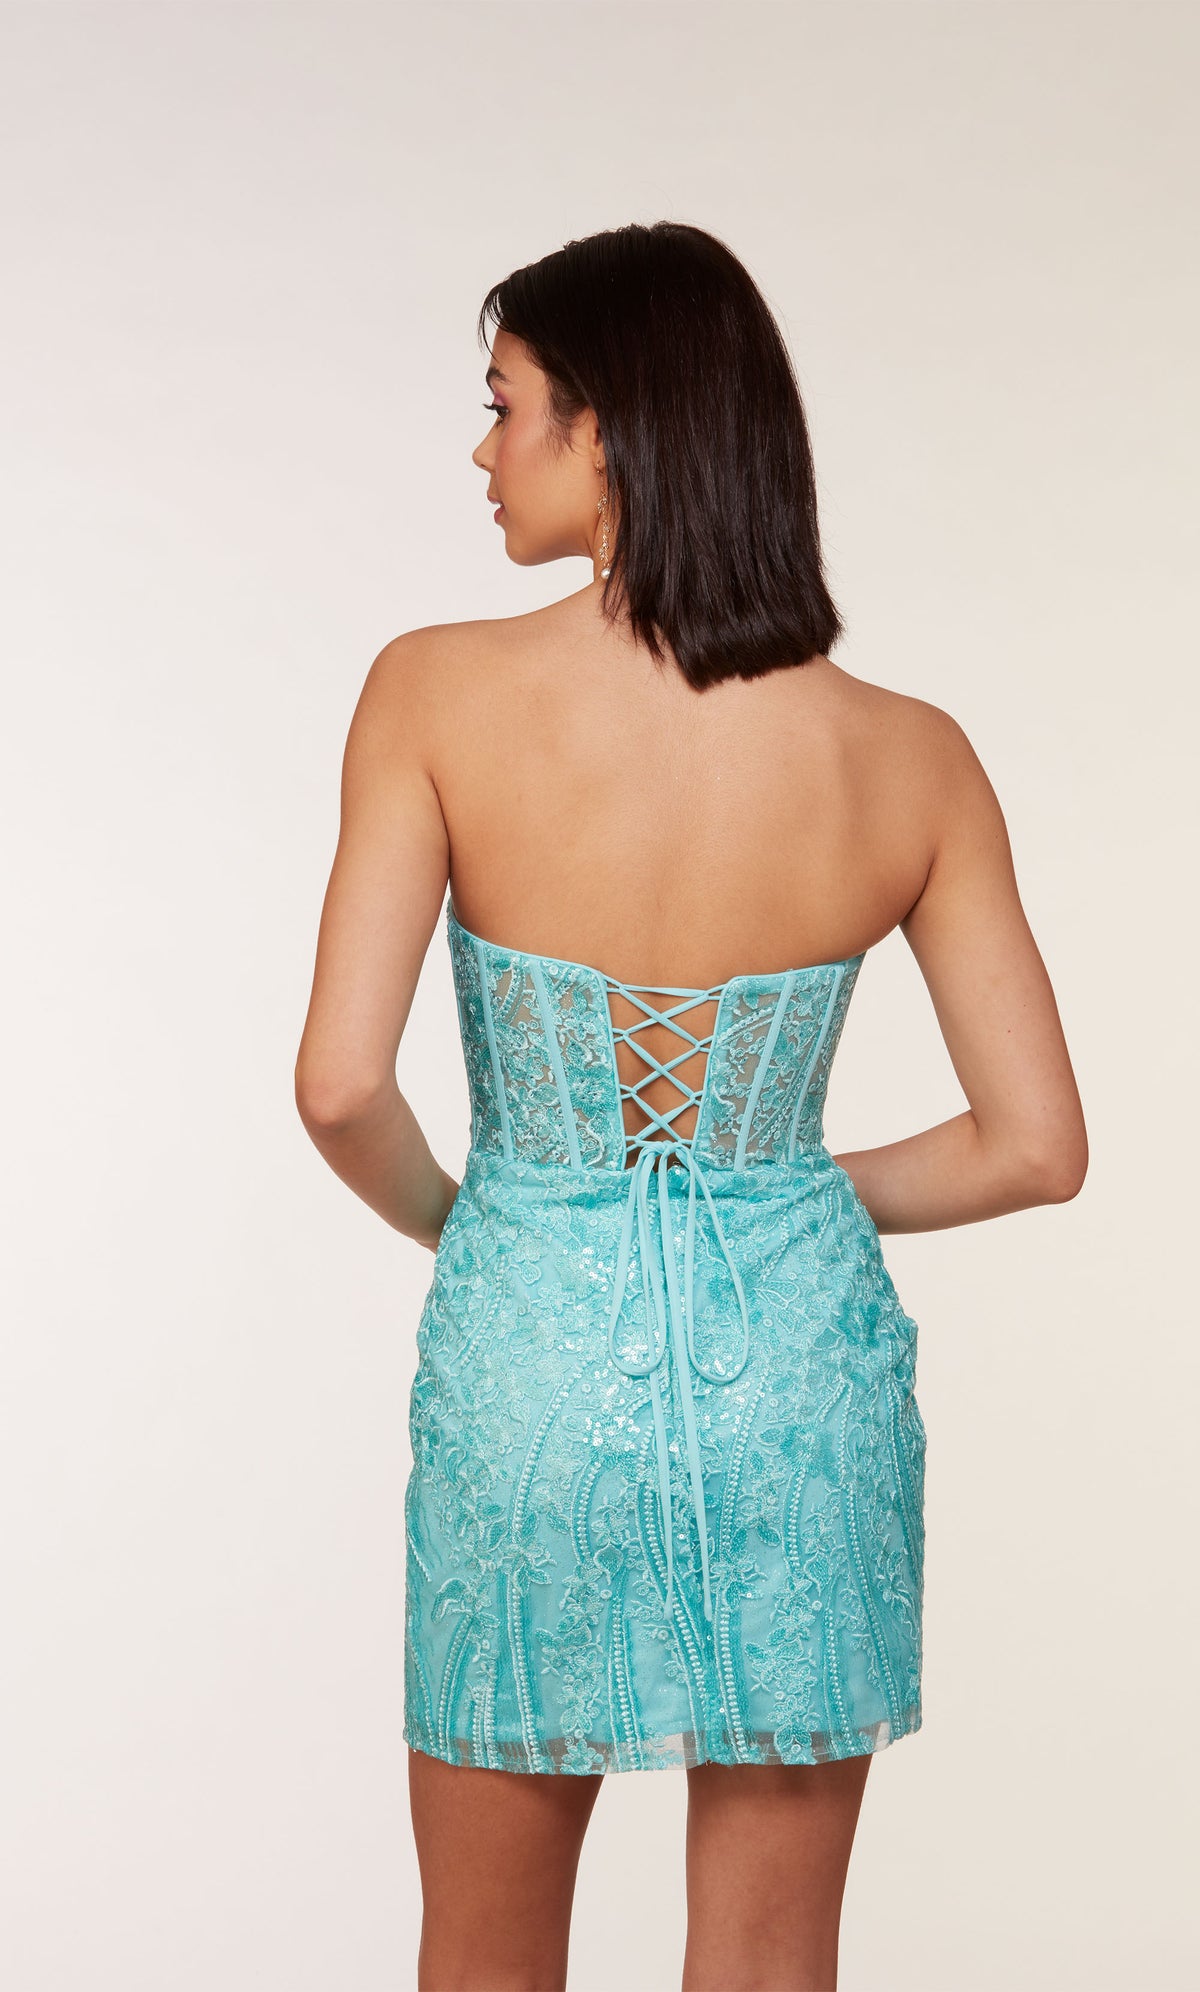 A short strapless corset dress with a lace-up back and a sheer bodice adorned with an intricate lace overlay and a side slit. The dress was created in a refreshing turquoise-like blue called blue radiance.